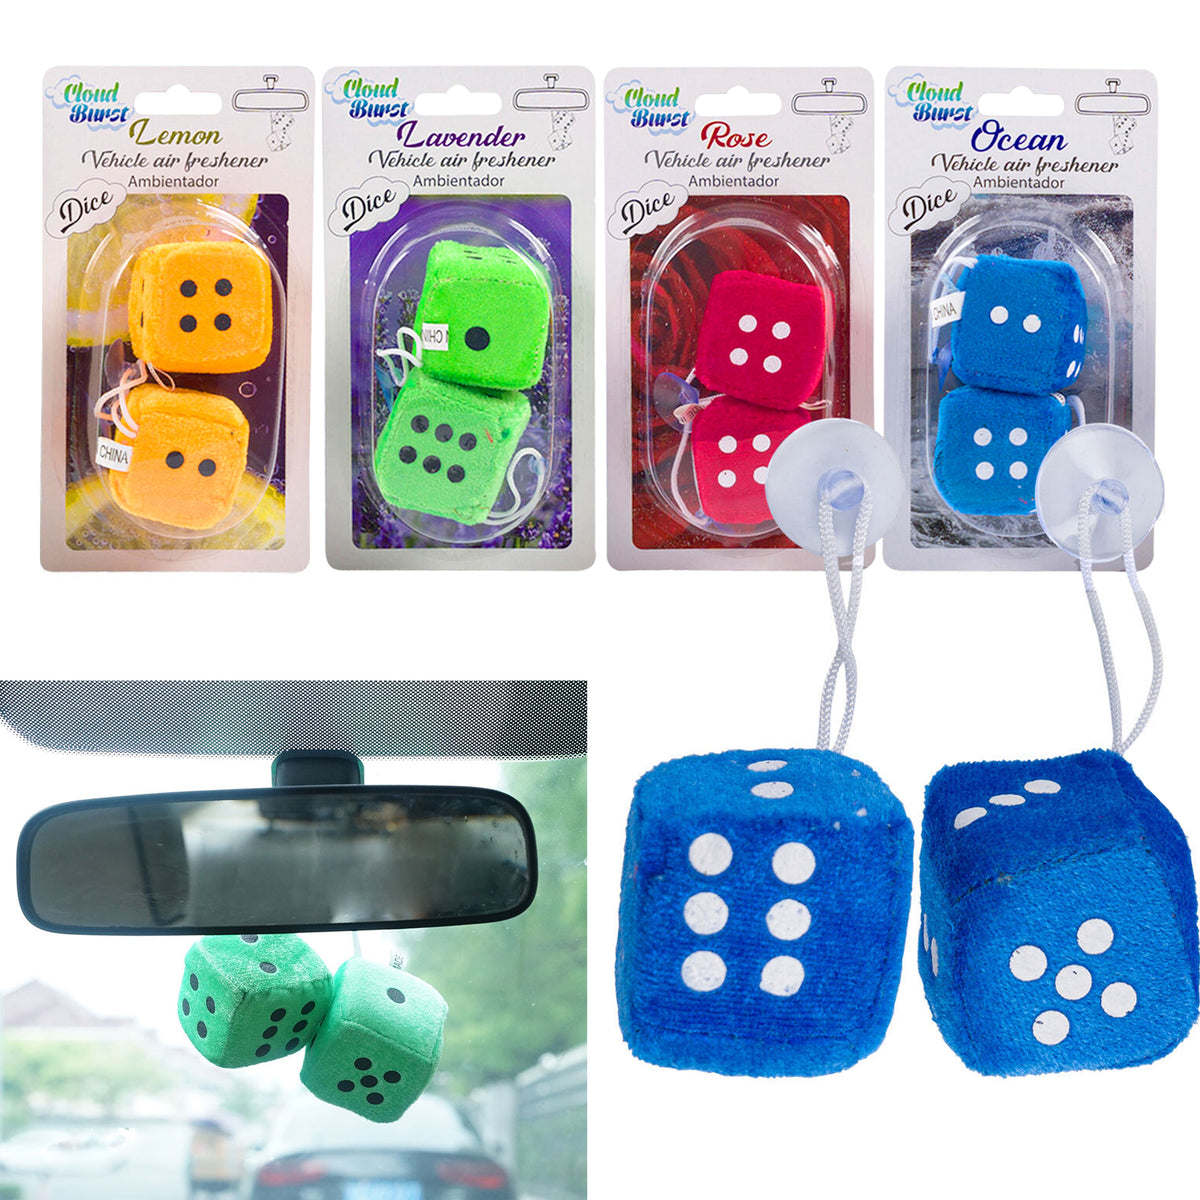 2 Pairs Plush Fuzzy Dice Scented Air Freshener Vintage Auto Car